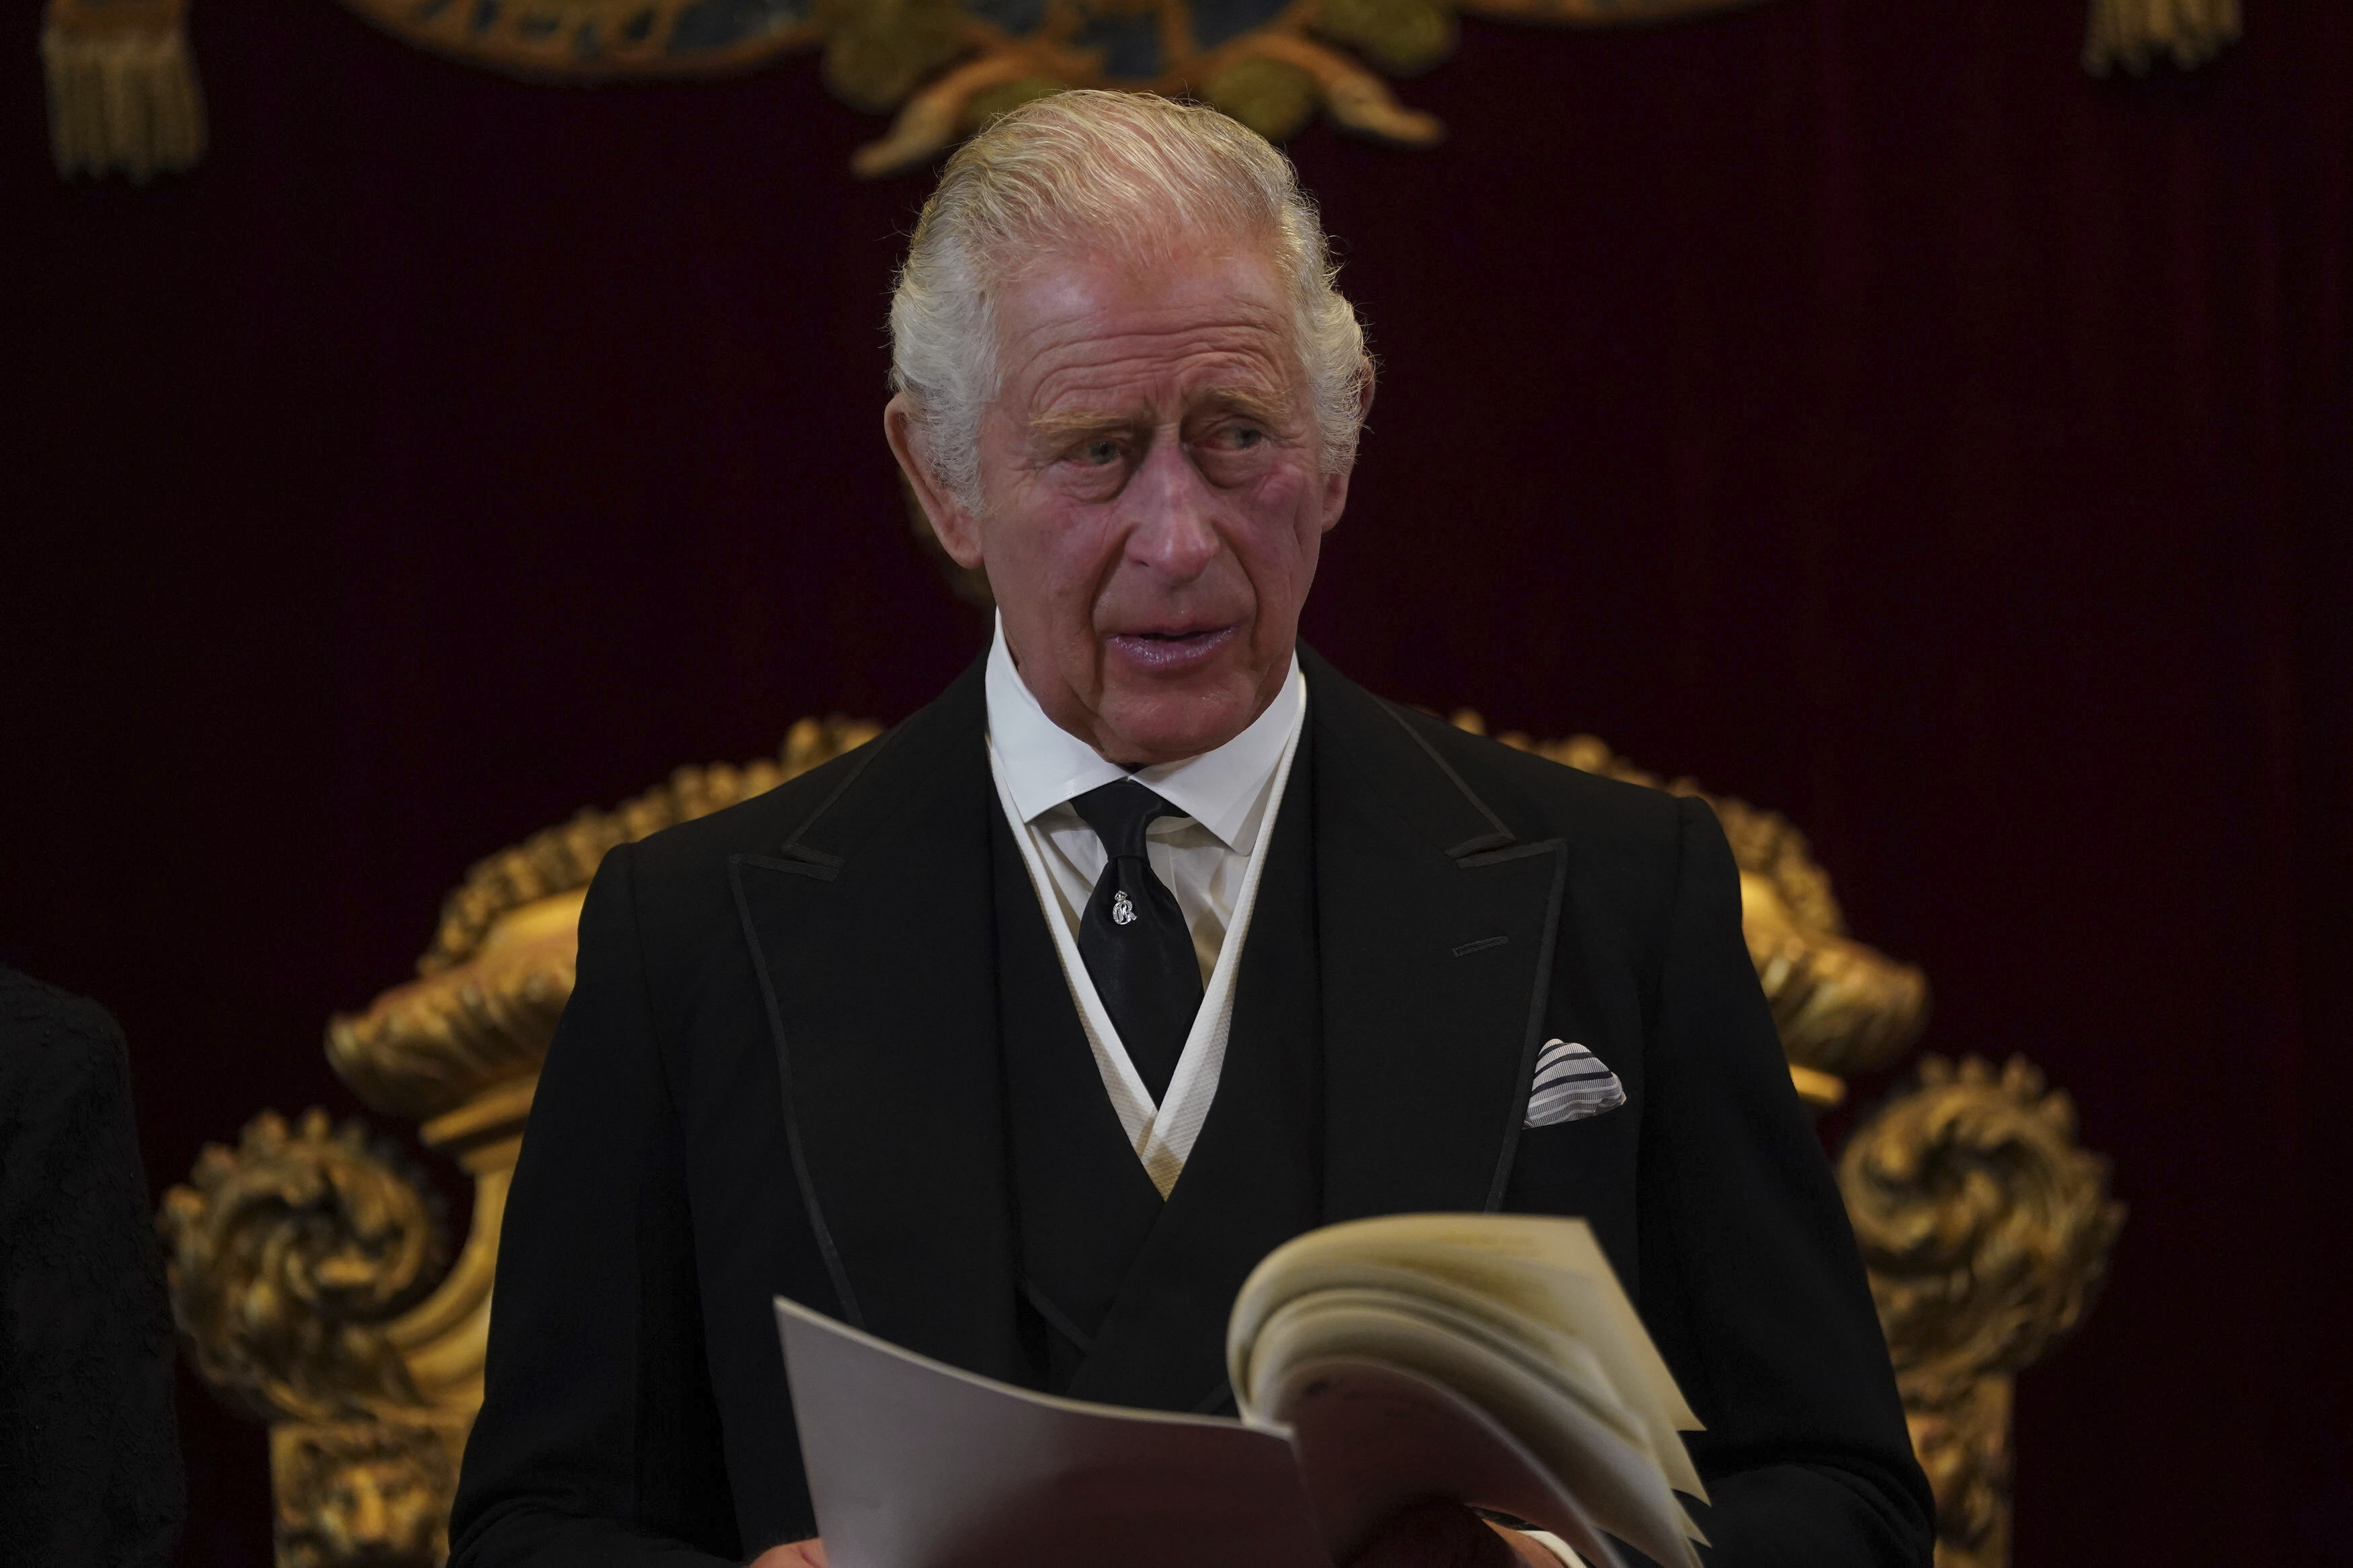 King Charles III formally proclaimed UK's new monarch, News